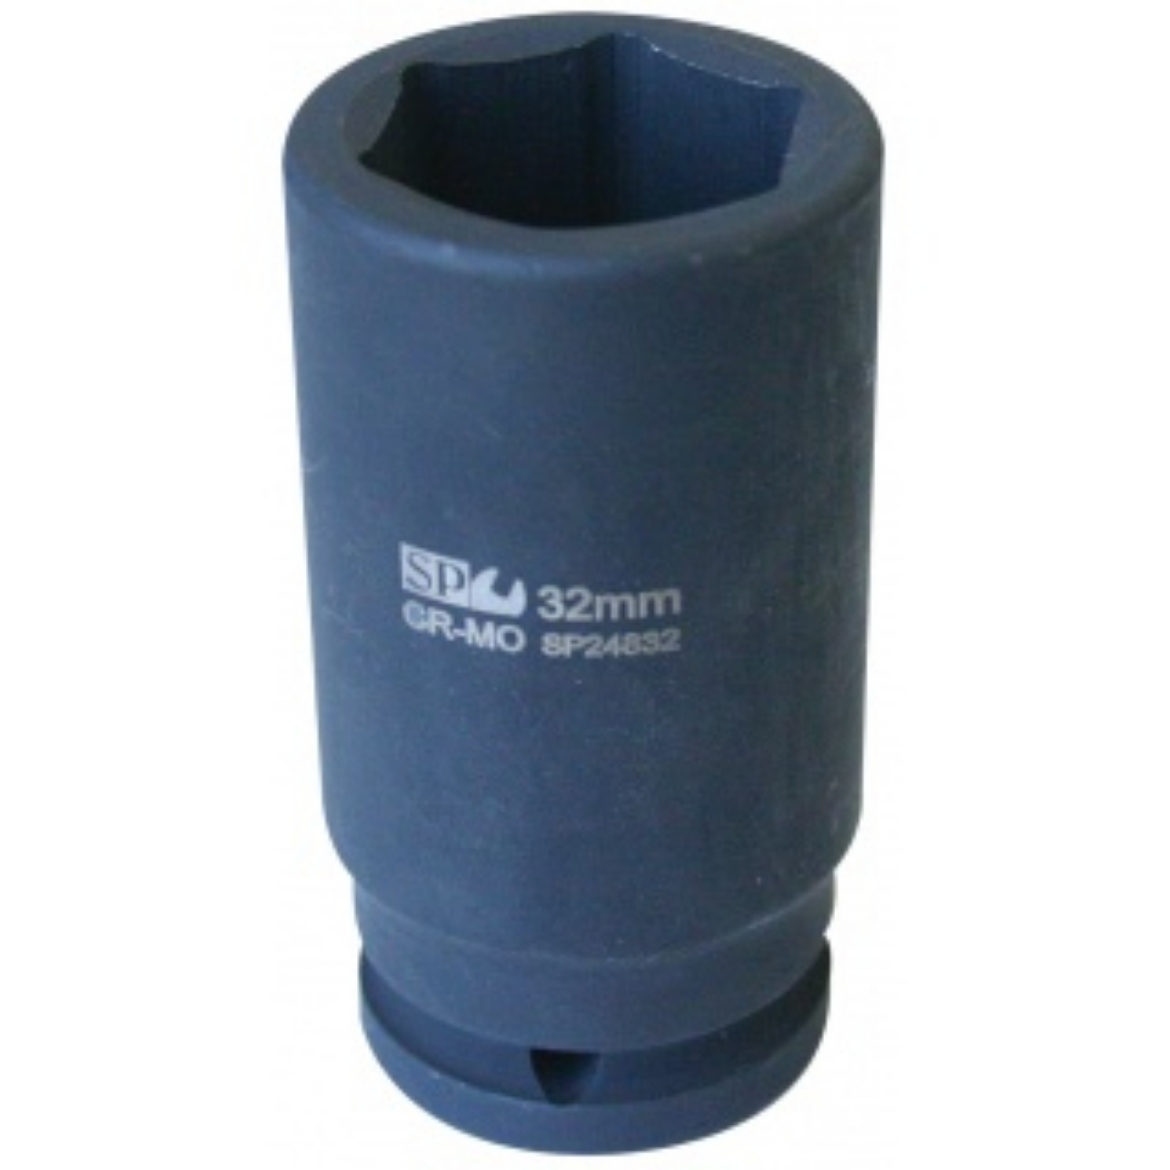 Picture of SOCKET IMPACT 3/4DR 6PT DEEP METRIC 32MM SP TOOLS